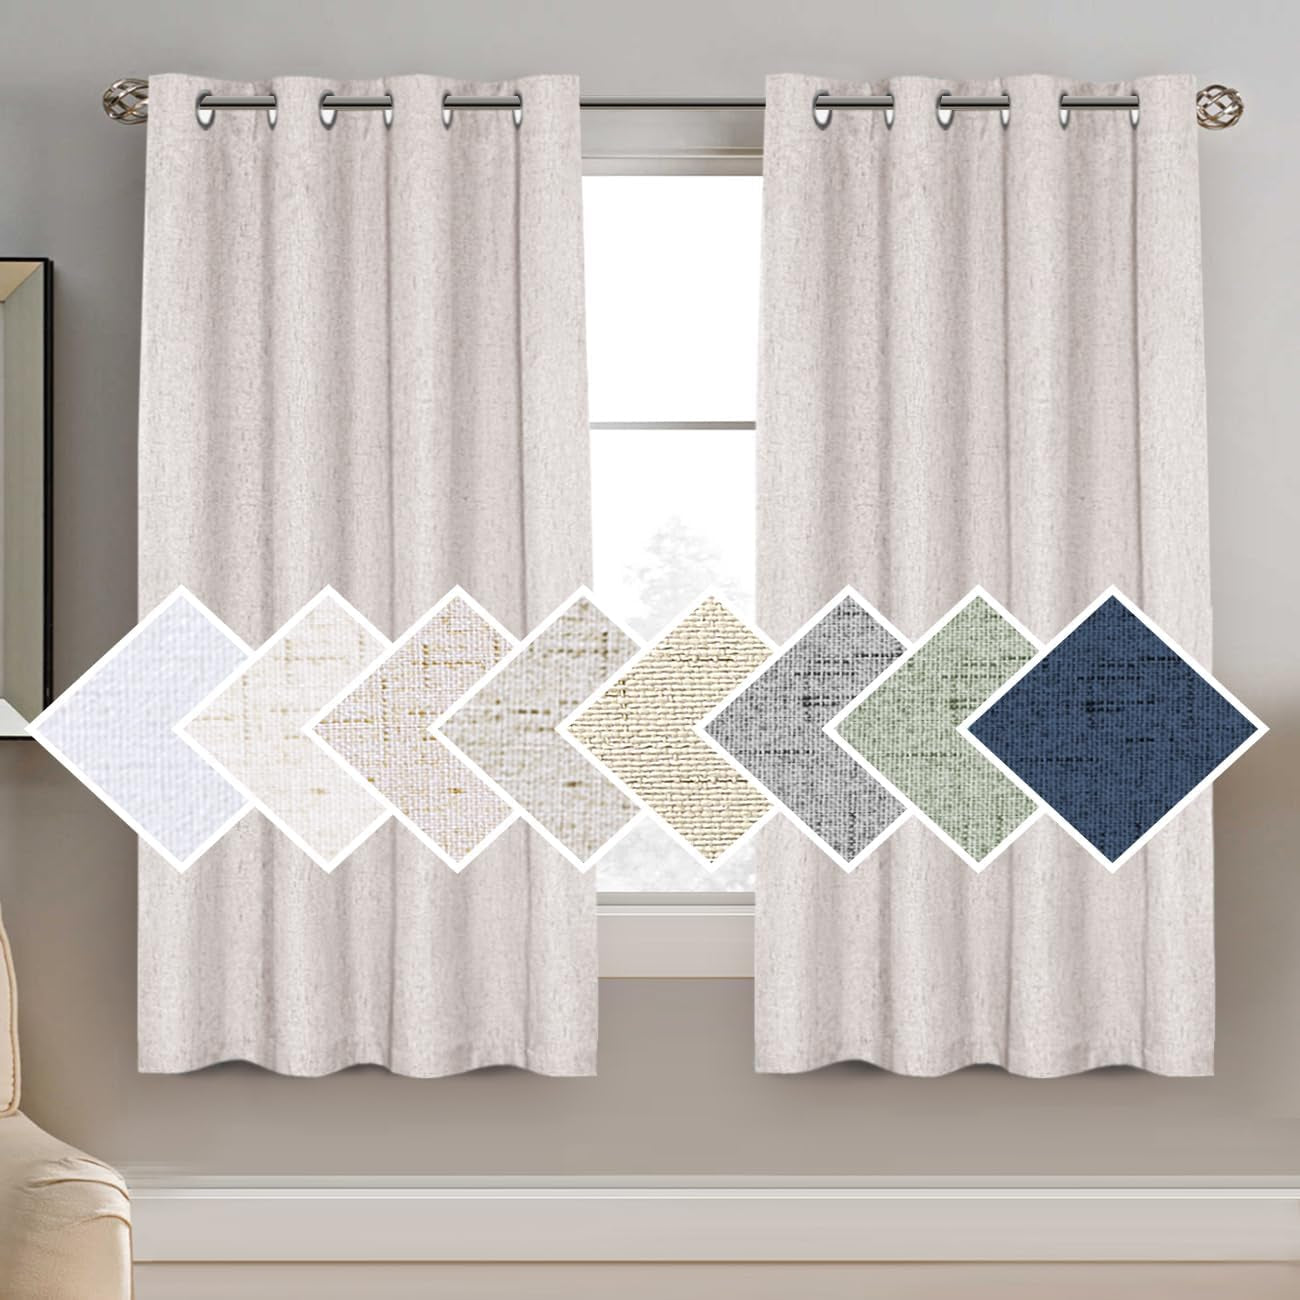 H.VERSAILTEX 100% Blackout Curtains for Bedroom Thermal Insulated Linen Textured Curtains Heat and Full Light Blocking Drapes Living Room Curtains 2 Panel Sets, 52X84 - Inch, Natural  H.VERSAILTEX Ivory 1 Panel - 52"W X 63"L 